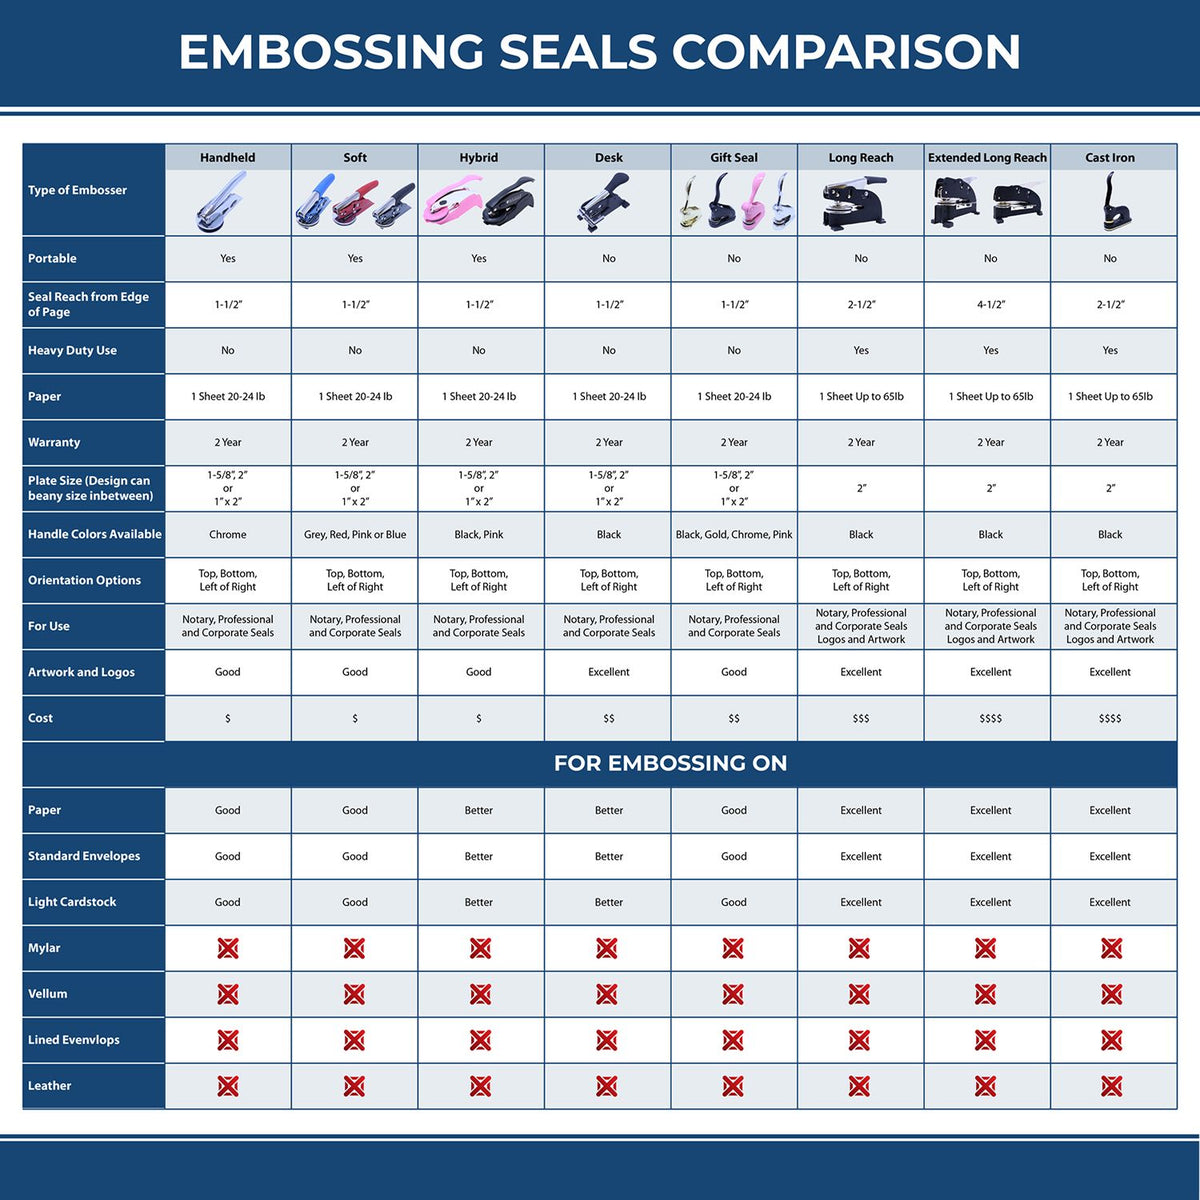 A comparison chart for the different types of mount models available for the Hybrid Texas Architect Seal